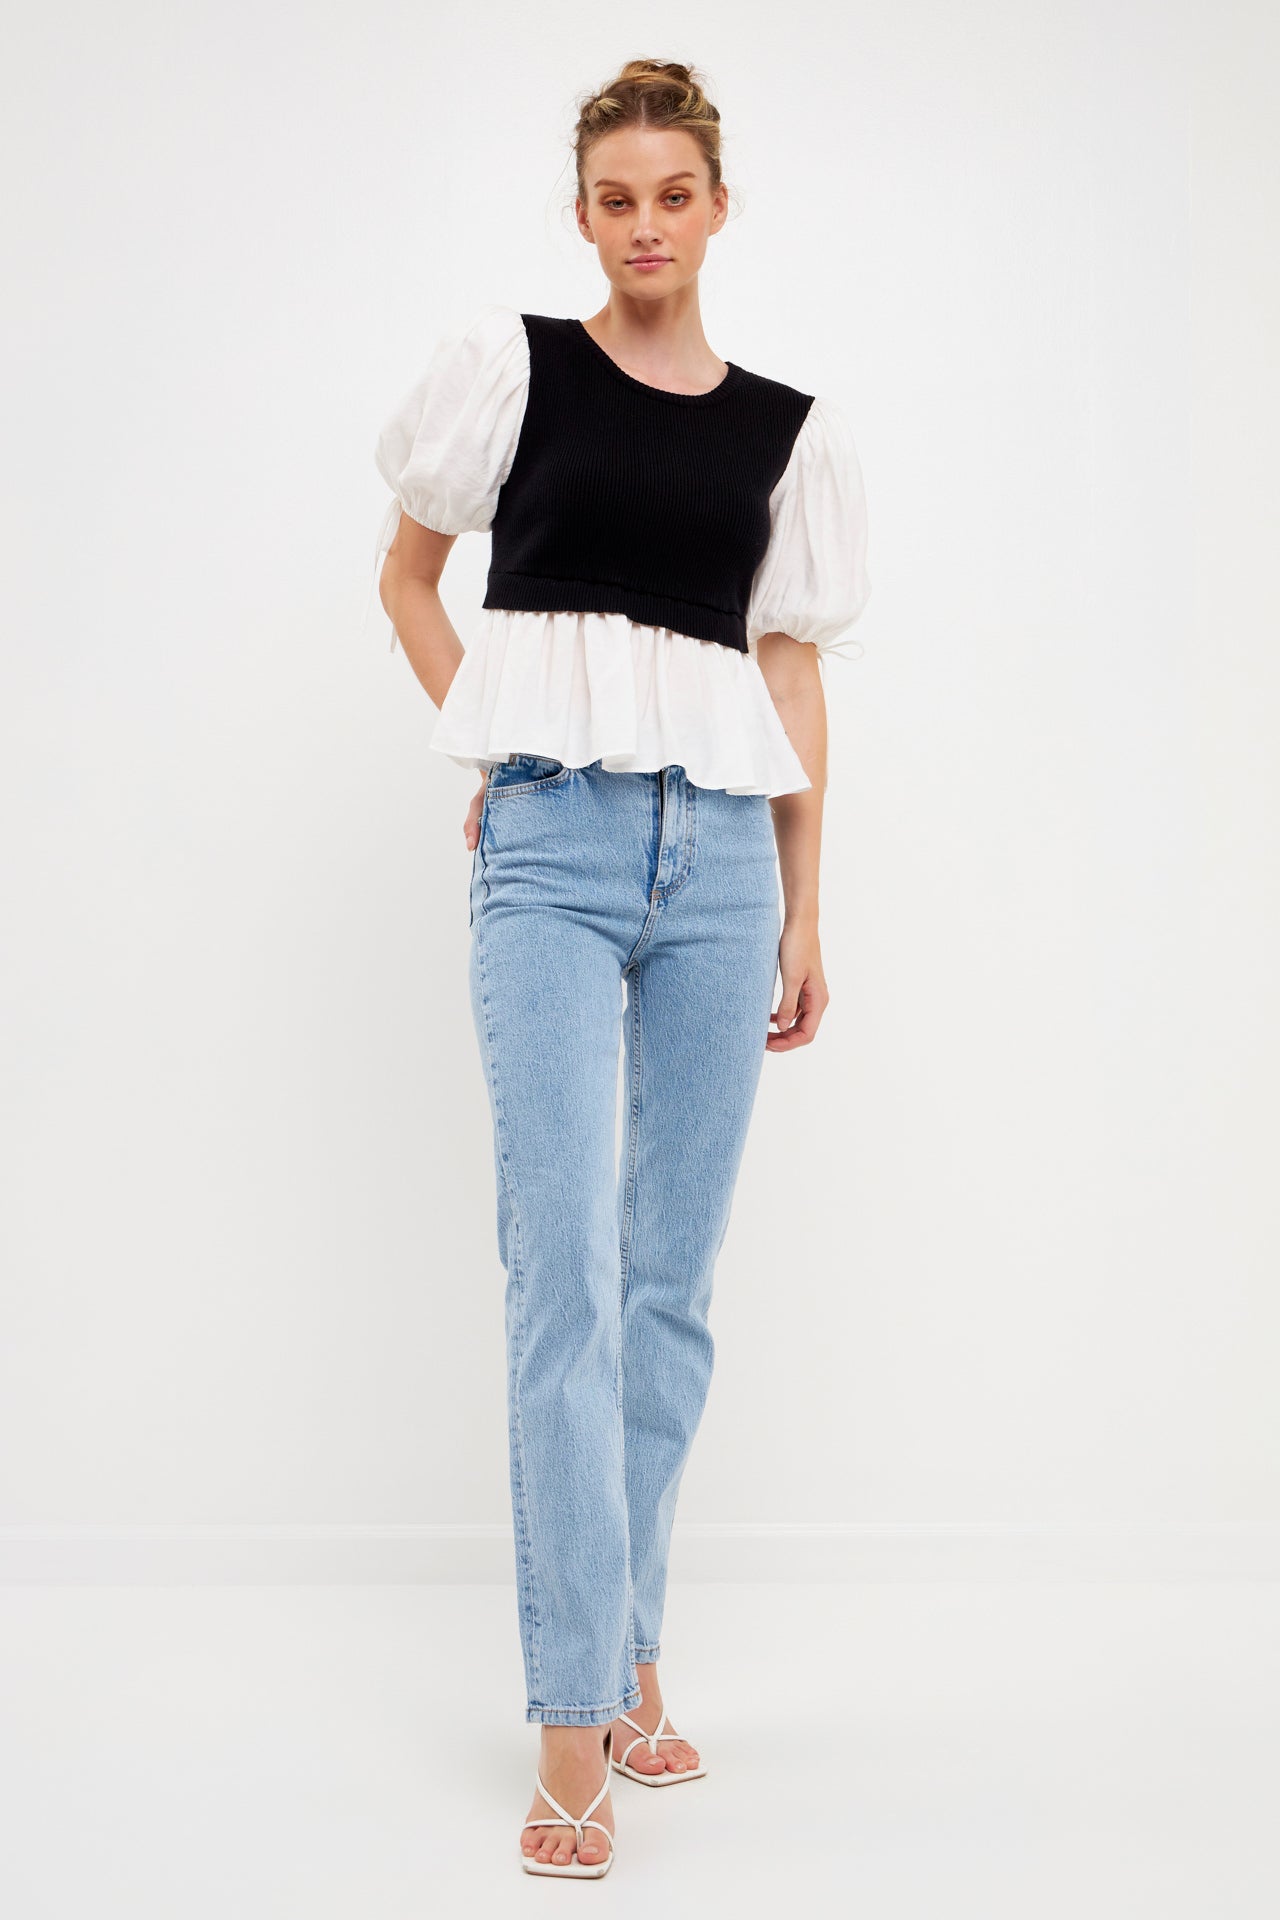 ENGLISH FACTORY - Mixed Media Puff Sleeve Knit Top - TOPS available at Objectrare